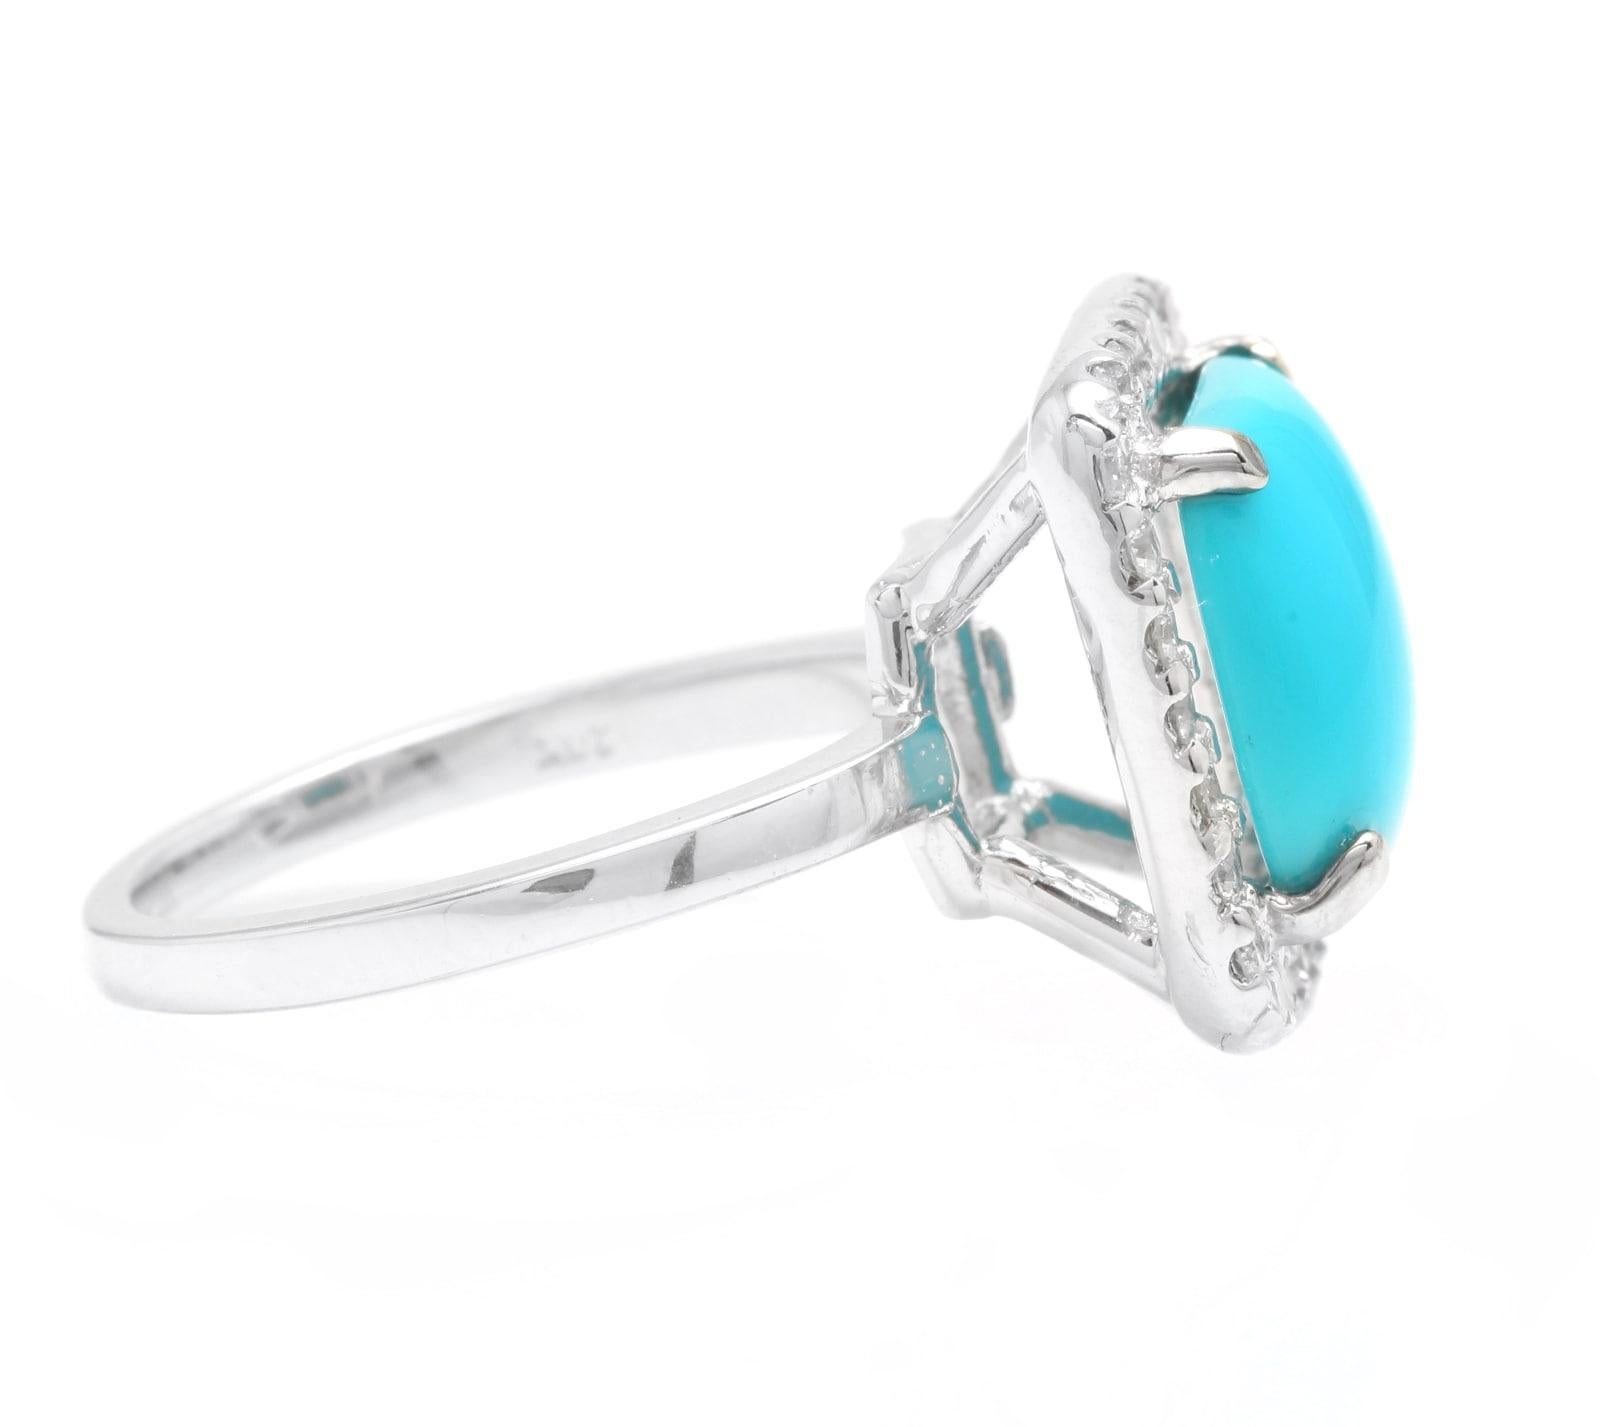 3.60 Carats Impressive Natural Turquoise and Diamond 18K White Gold Ring

Suggested Replacement Value $4,500.00

Total Natural Oval Turquoise Weight is: Approx. 3.20 Carats 

Turquoise Measures: 10.00 x 10.00mm 

Natural Round Diamonds Weight: